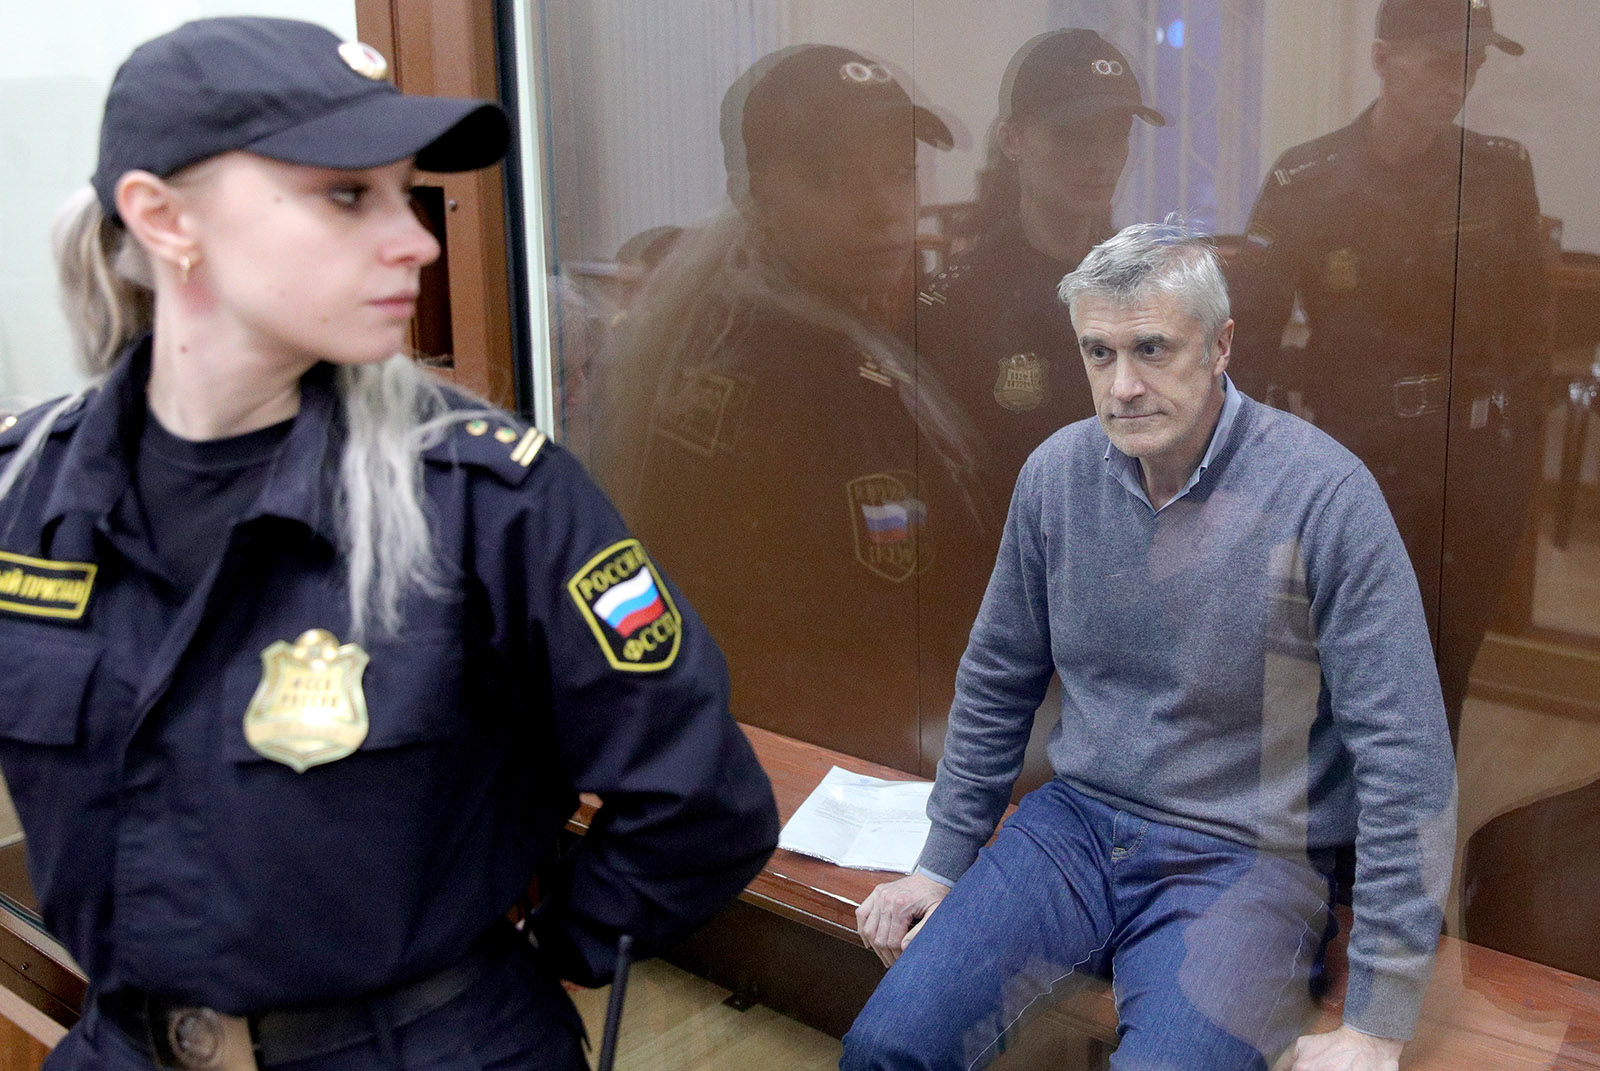 Baring Vostok founder Michael Calvey at a Moscow district court hearing following his arrest on fraud charges, Russia, February 15, 2019